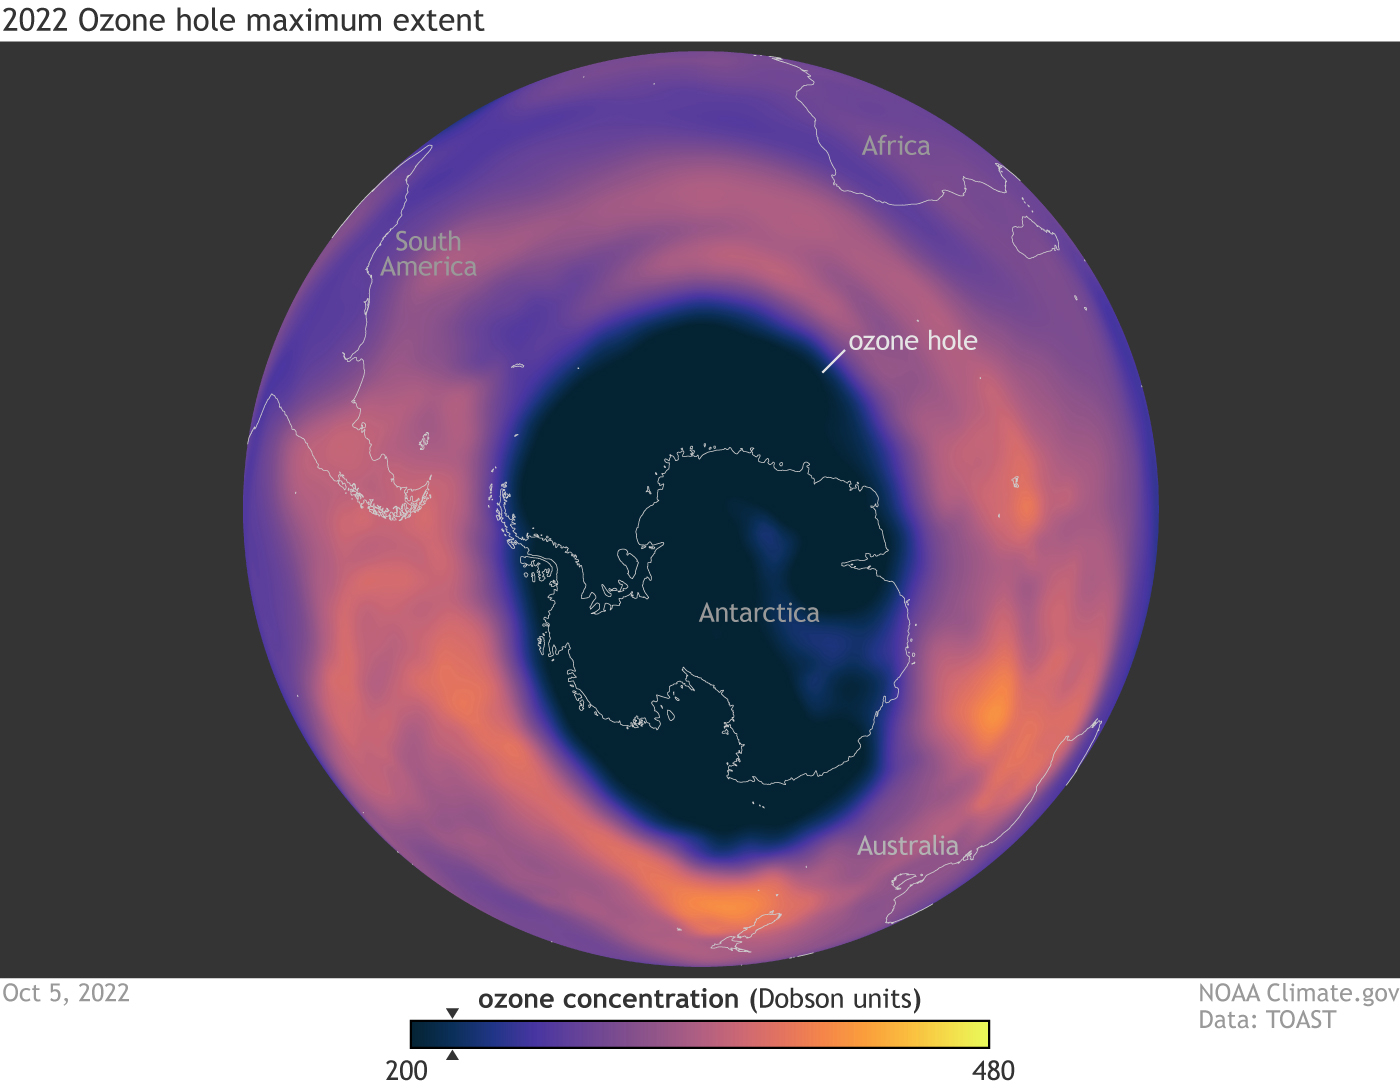 The maximum extent of the 2022 ozone hole over Antarctica was slightly smaller than the 2021 maximum, and well below the average seen in 2006 when the hole size peaked.